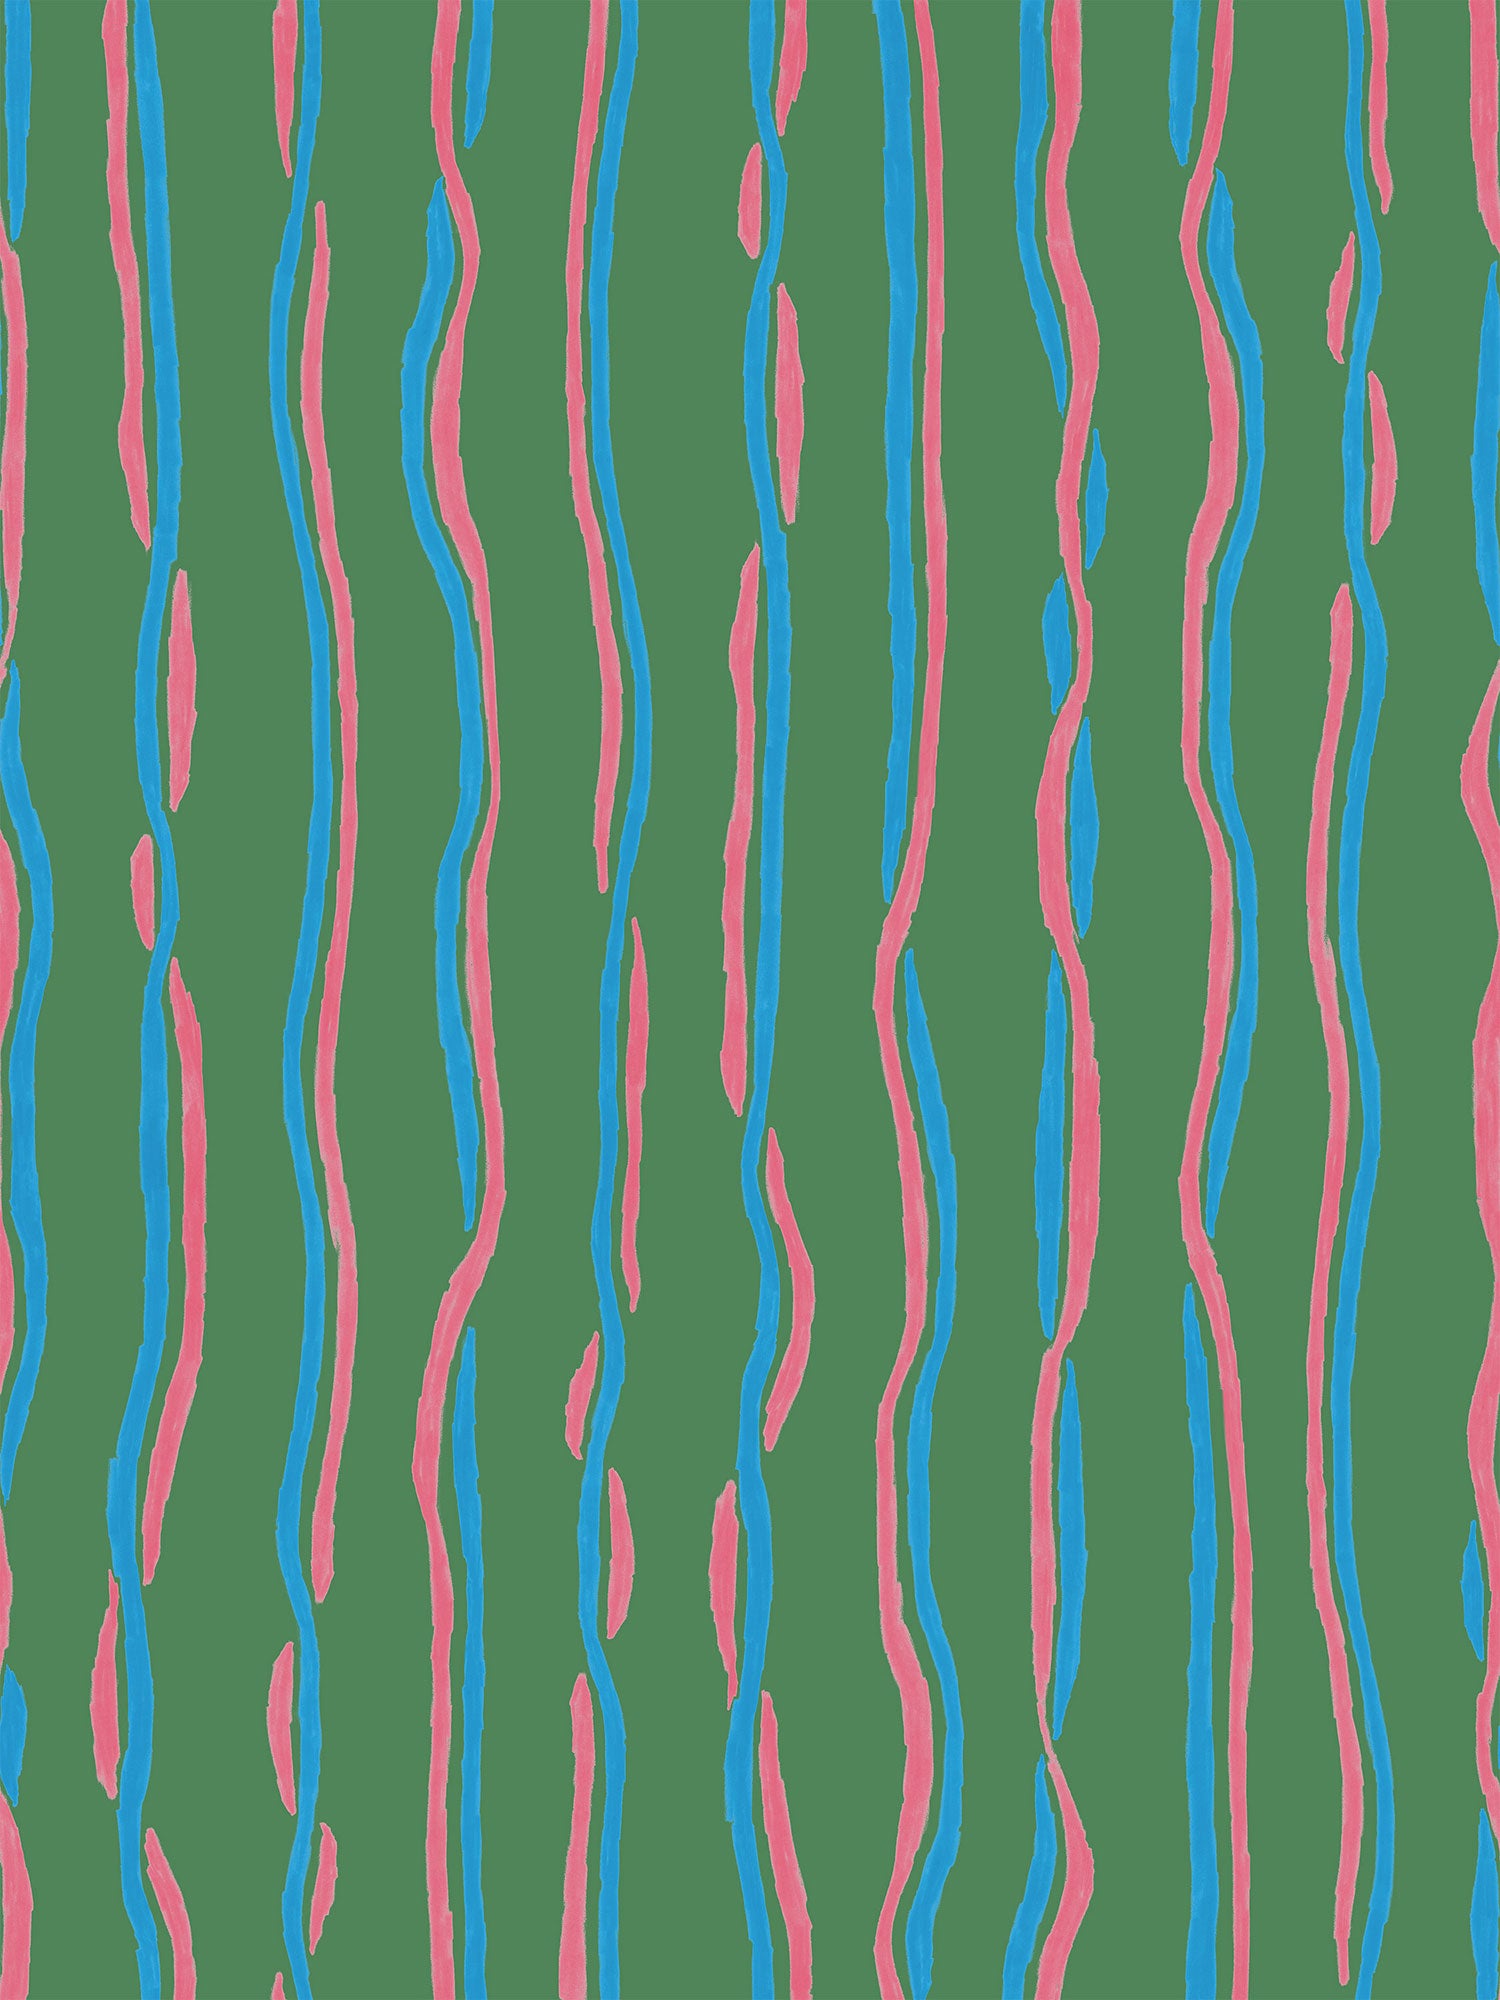 Green wallpaper with vertical ribbon stripes in blue and pink